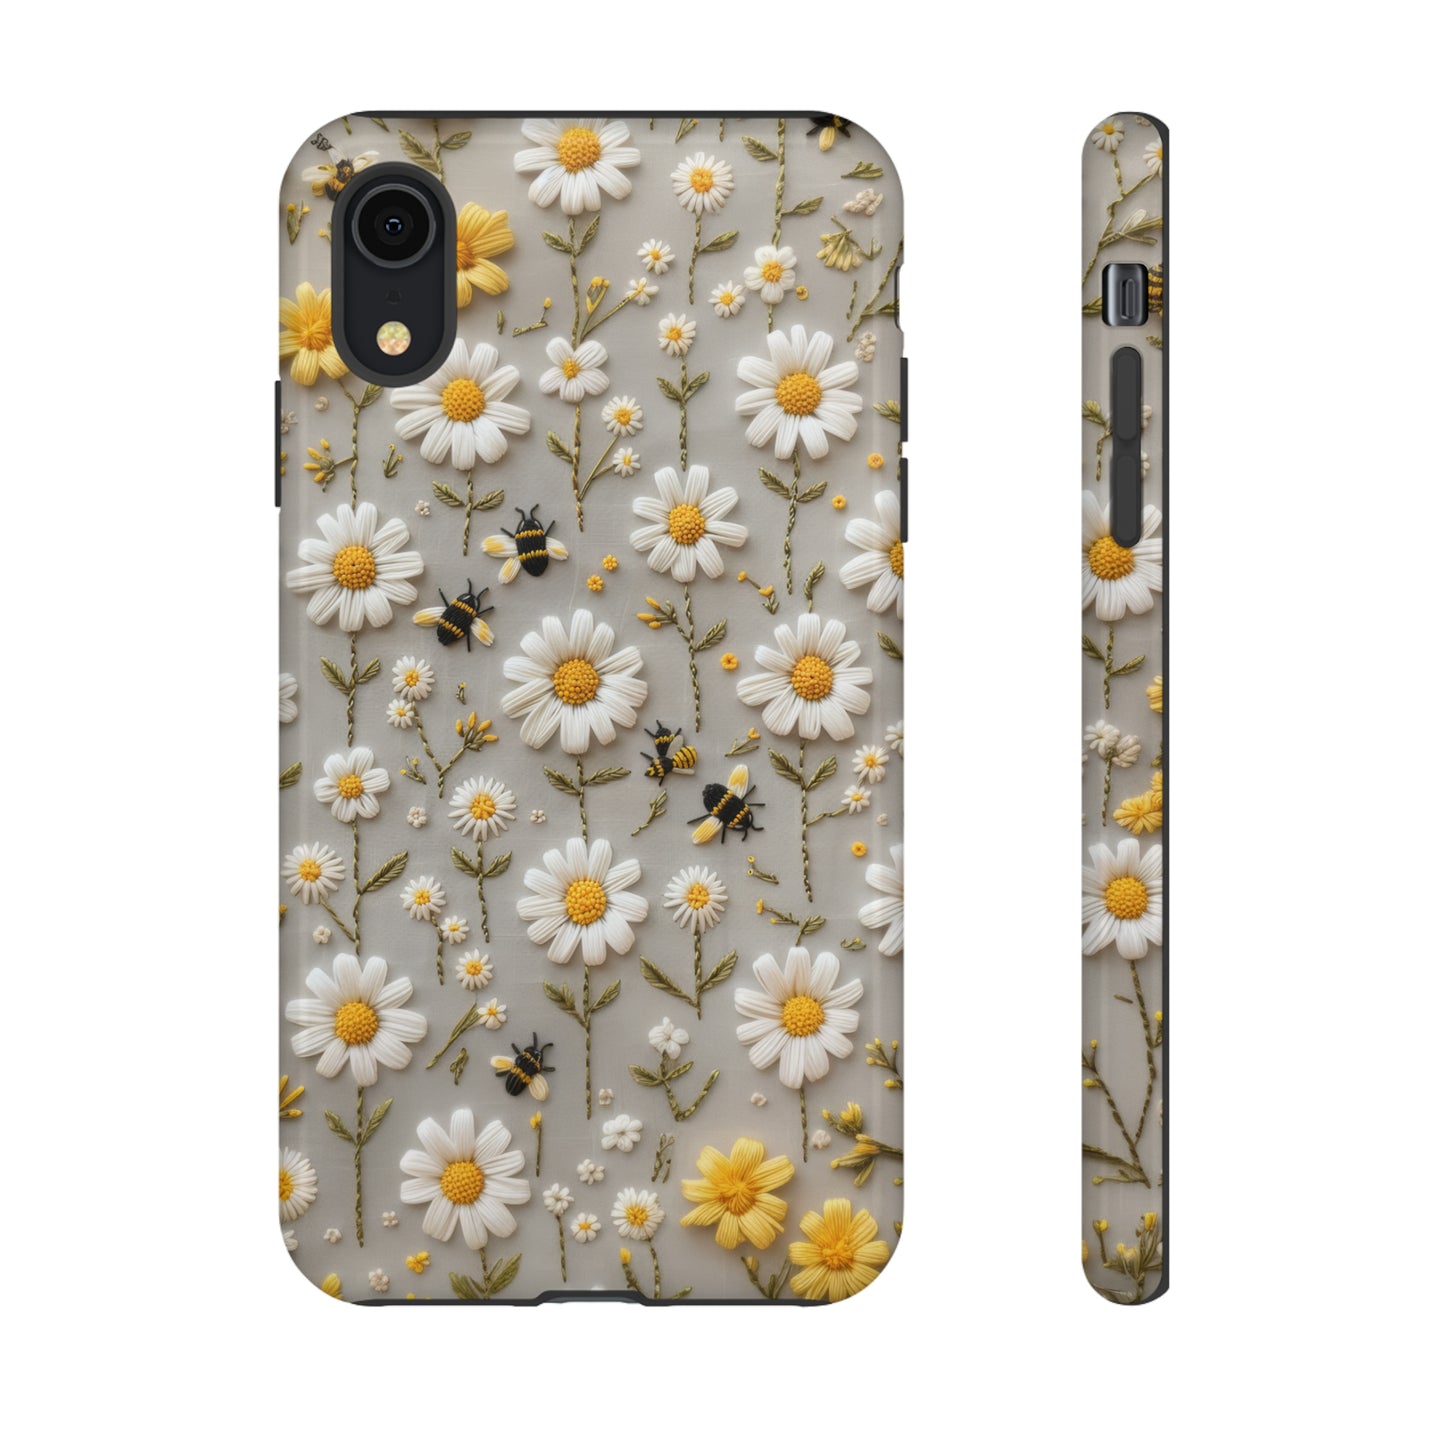 Spring Daisy Phone Case, Bees & Flowers Design, Nature-Inspired Protective Phone Cover, Tough Phone Cases